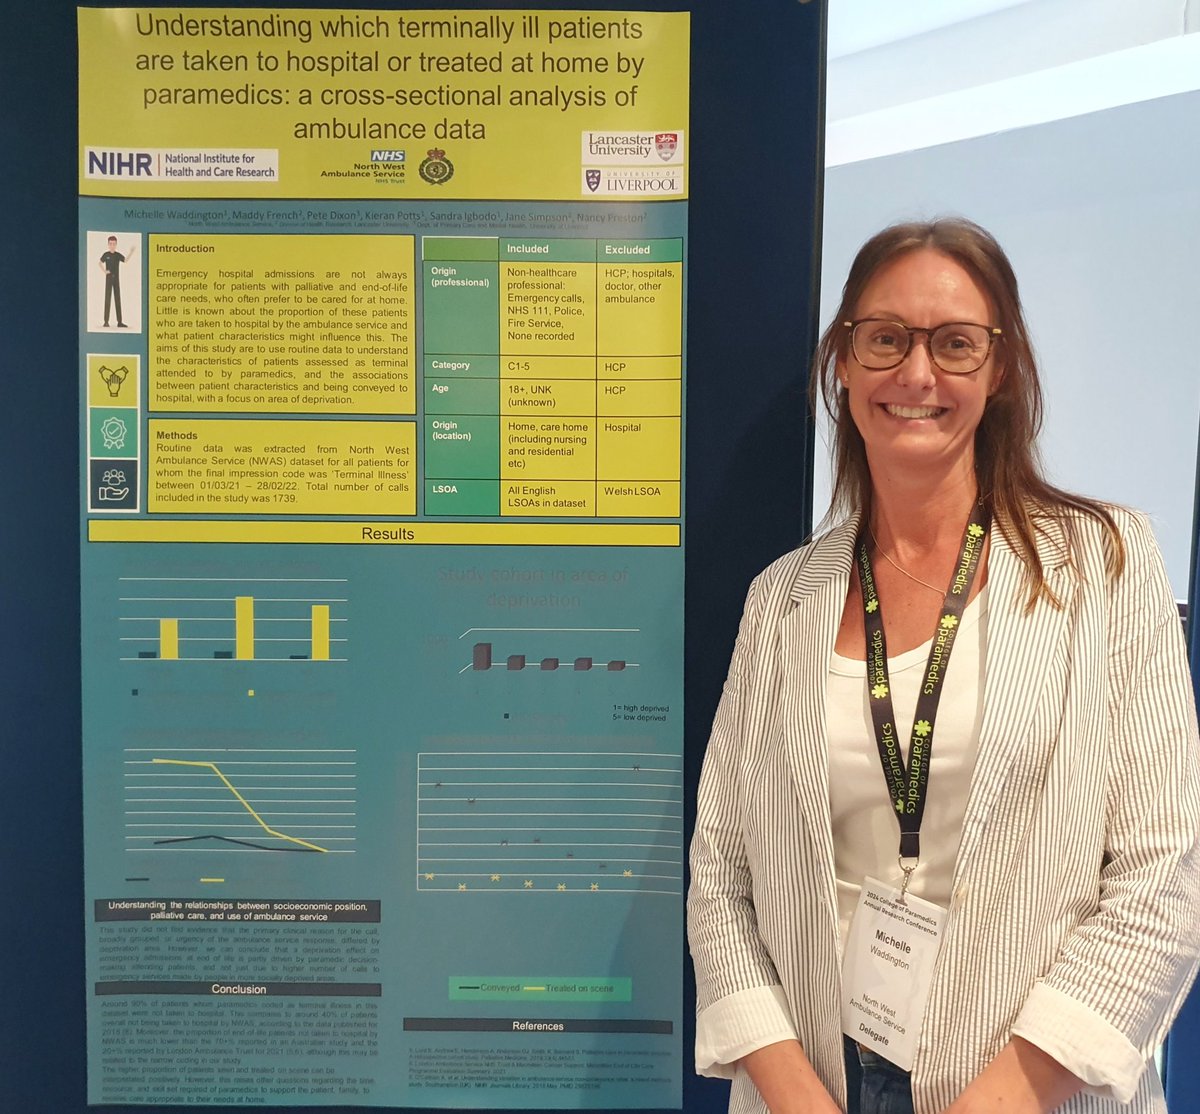 Congratulations to @NWAmbulance Research Paramedic @waddyshelle for taking part in the moderated poster presentation @ParamedicsUK Research Conference 2024 👏🏾 @mddyfrnch @NancyPreston16 @IOELC, Prof Jane Simpson @C4ARLancs, Dr Pete Dixon @LivUni and @NWAmb_Kieran 🙂